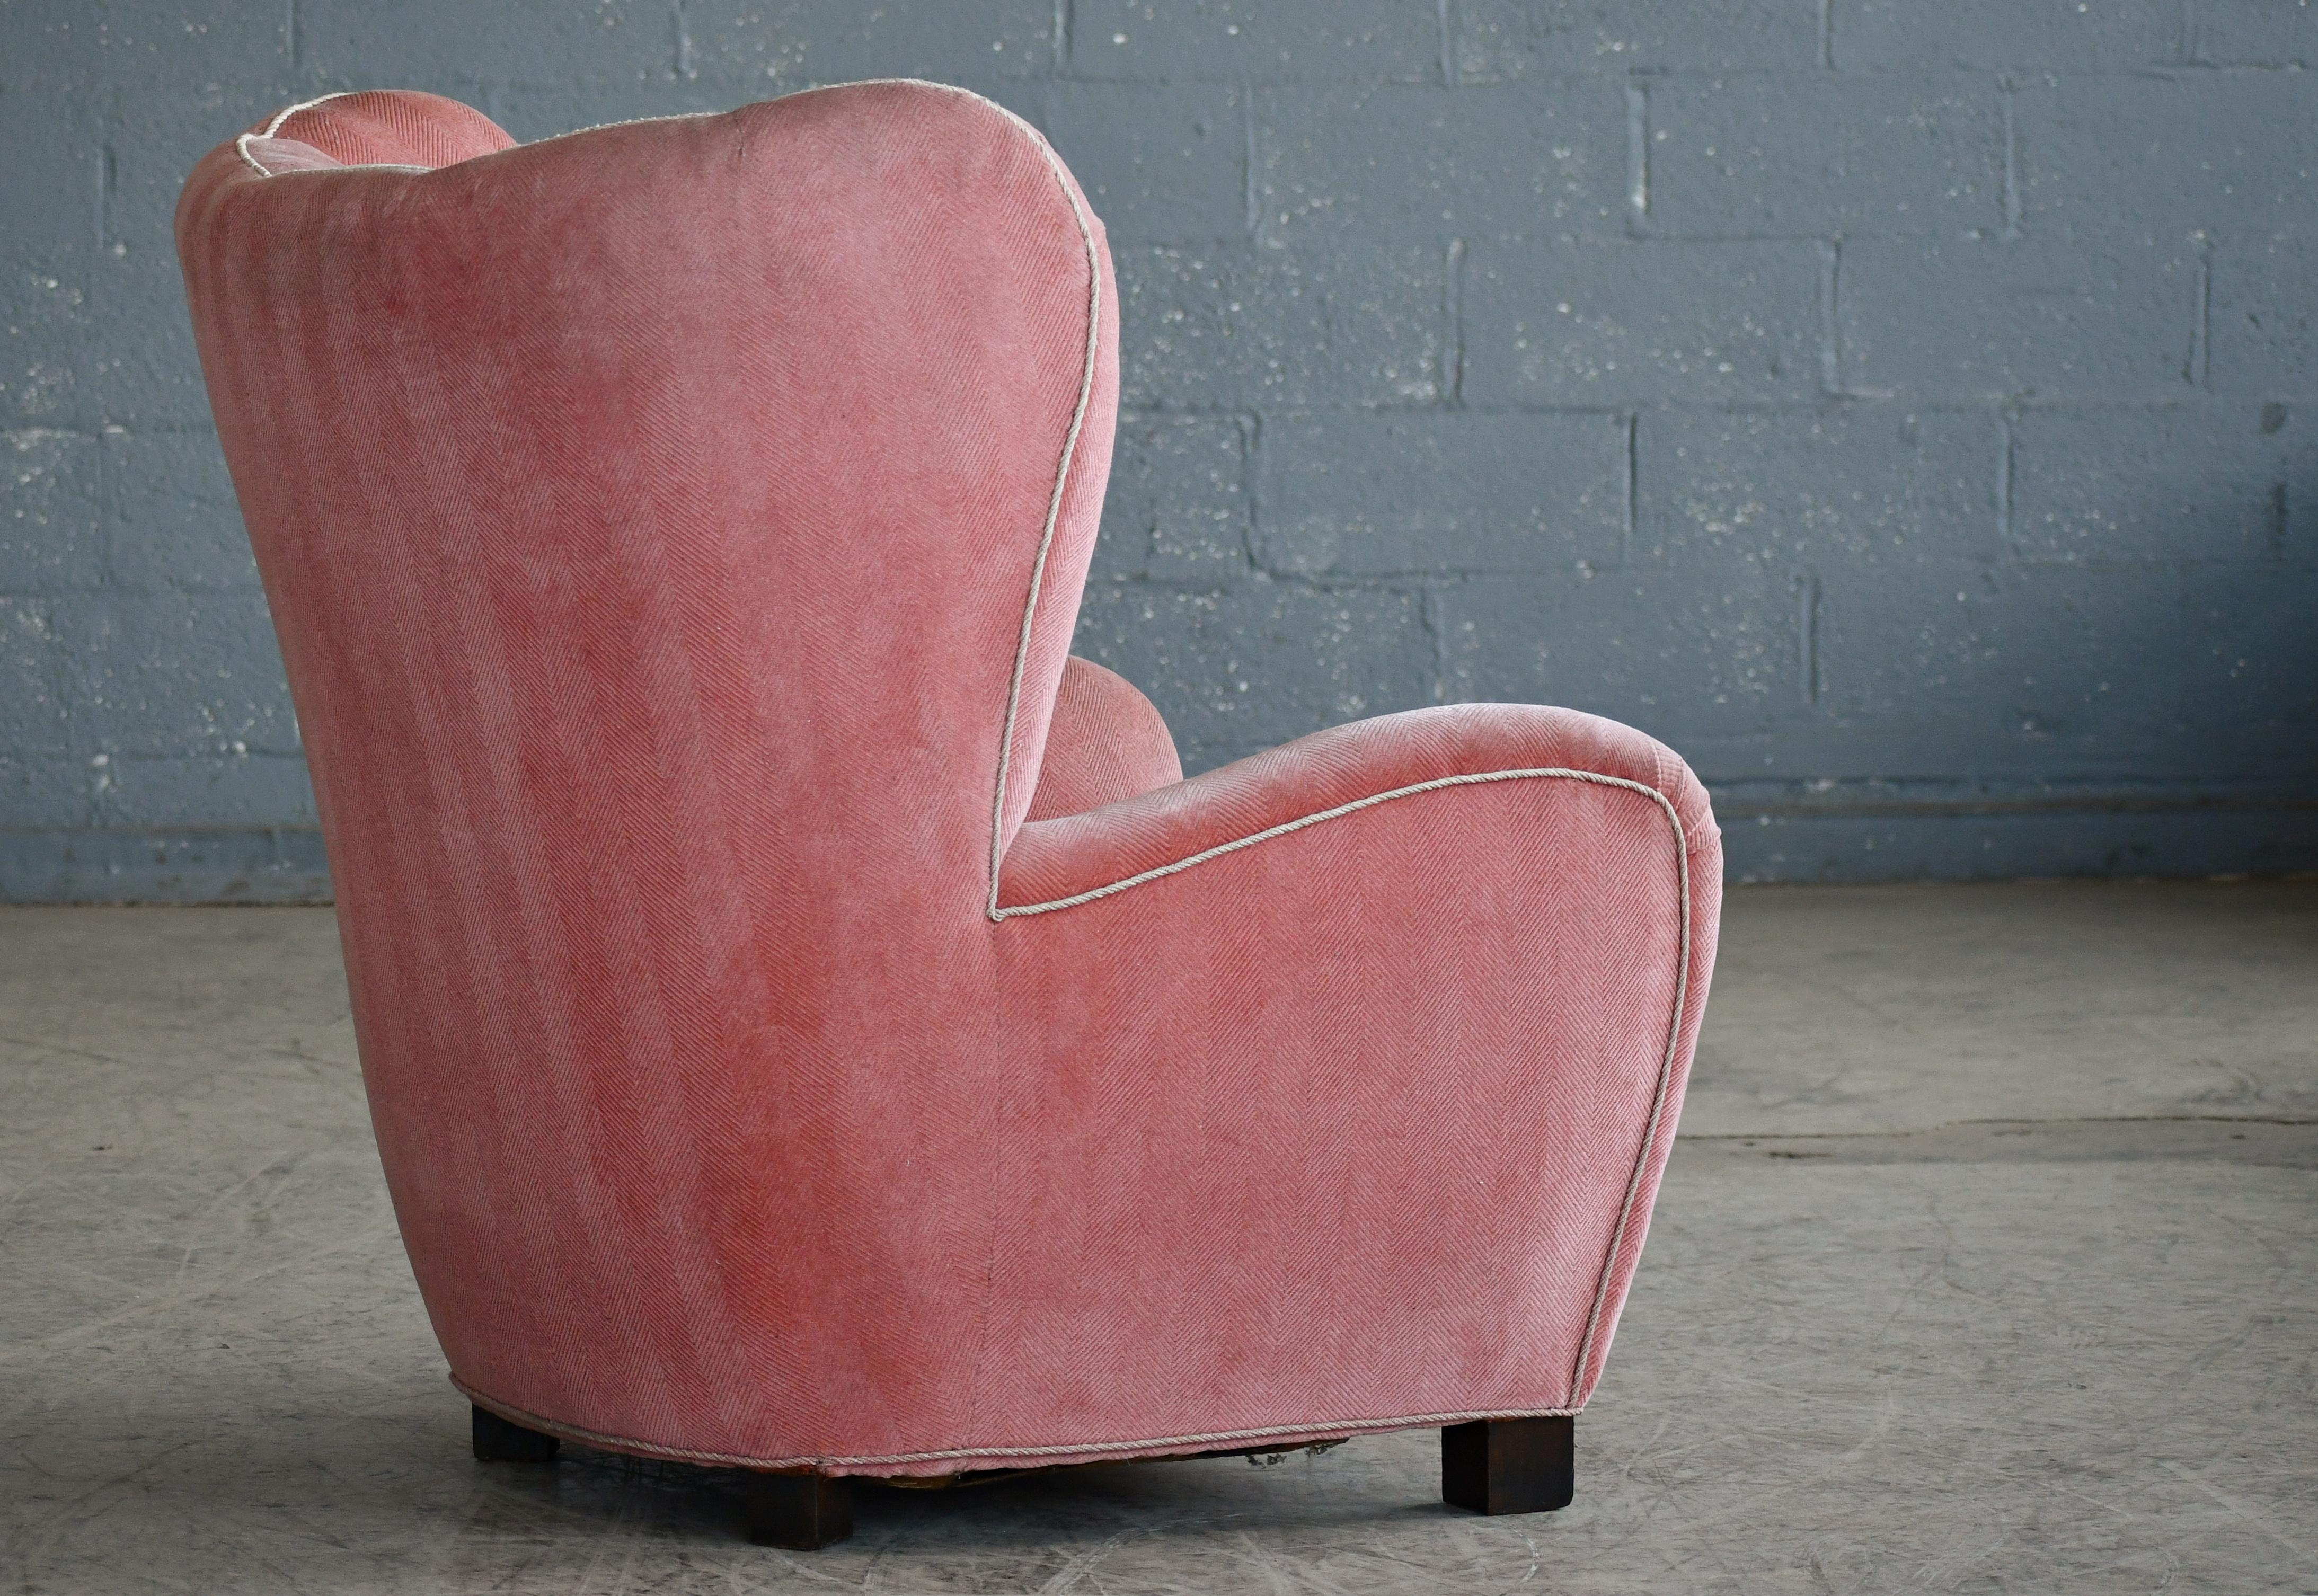 Large Danish 1940's Channelback Lounge Chair in Pink Mohair Round Organic Shape For Sale 1